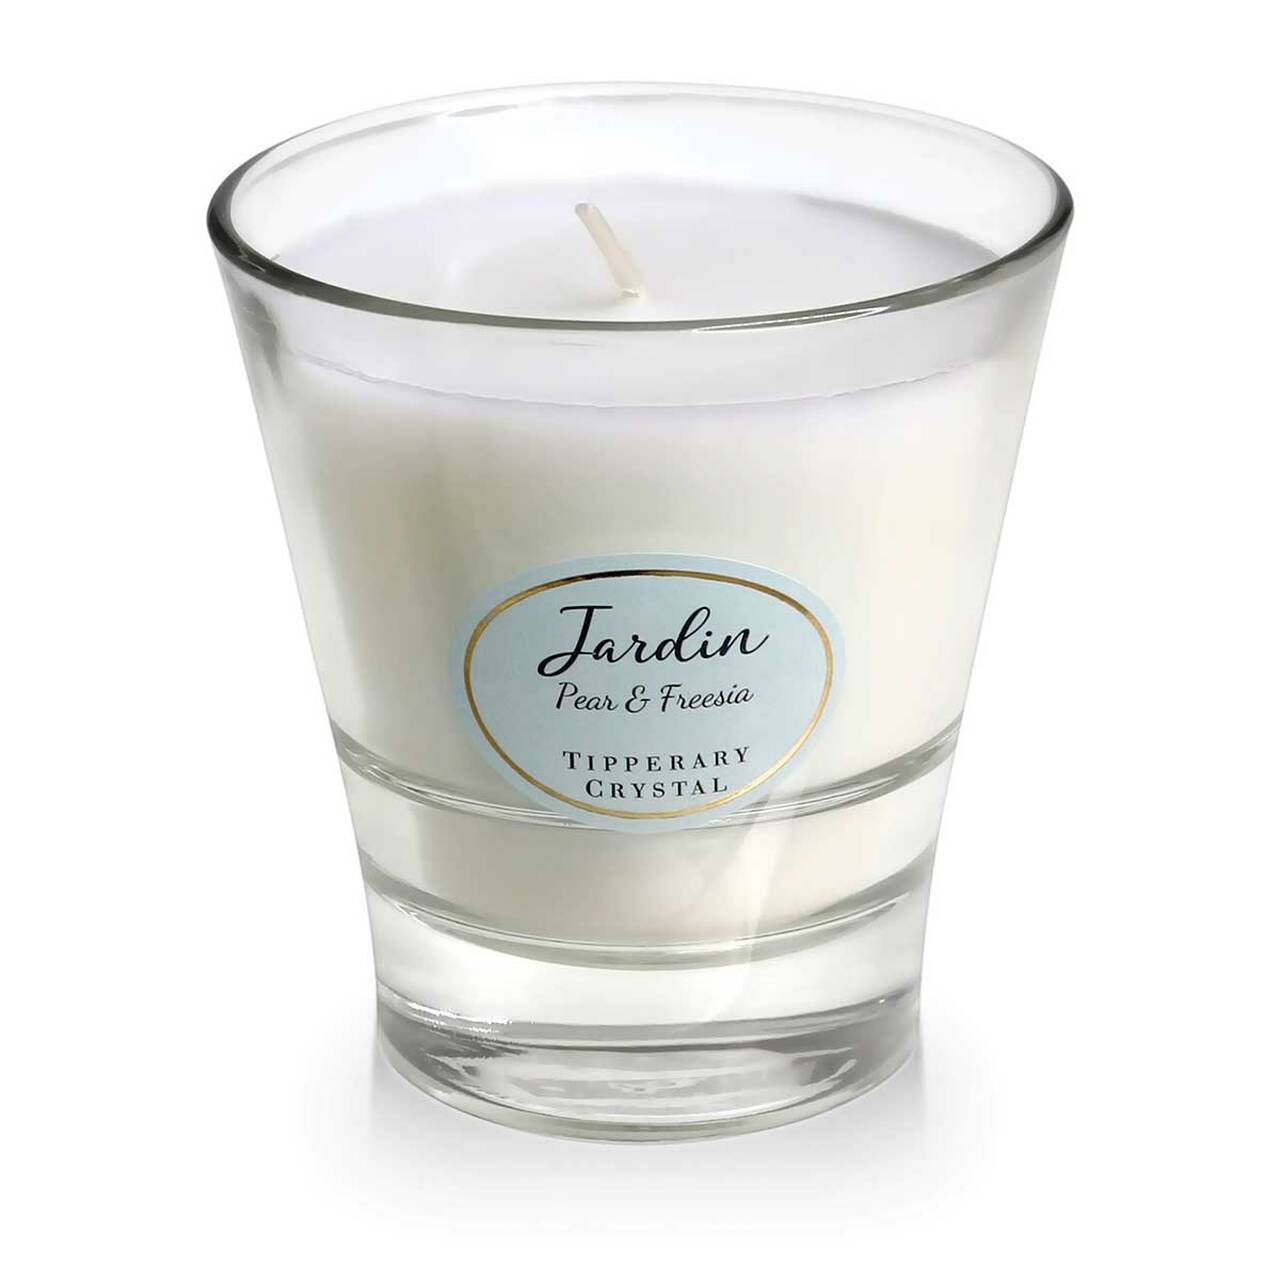 Tipperary Crystal Pear & Freesia Jardin Collection Candle & Diffuser Folded Card Gift